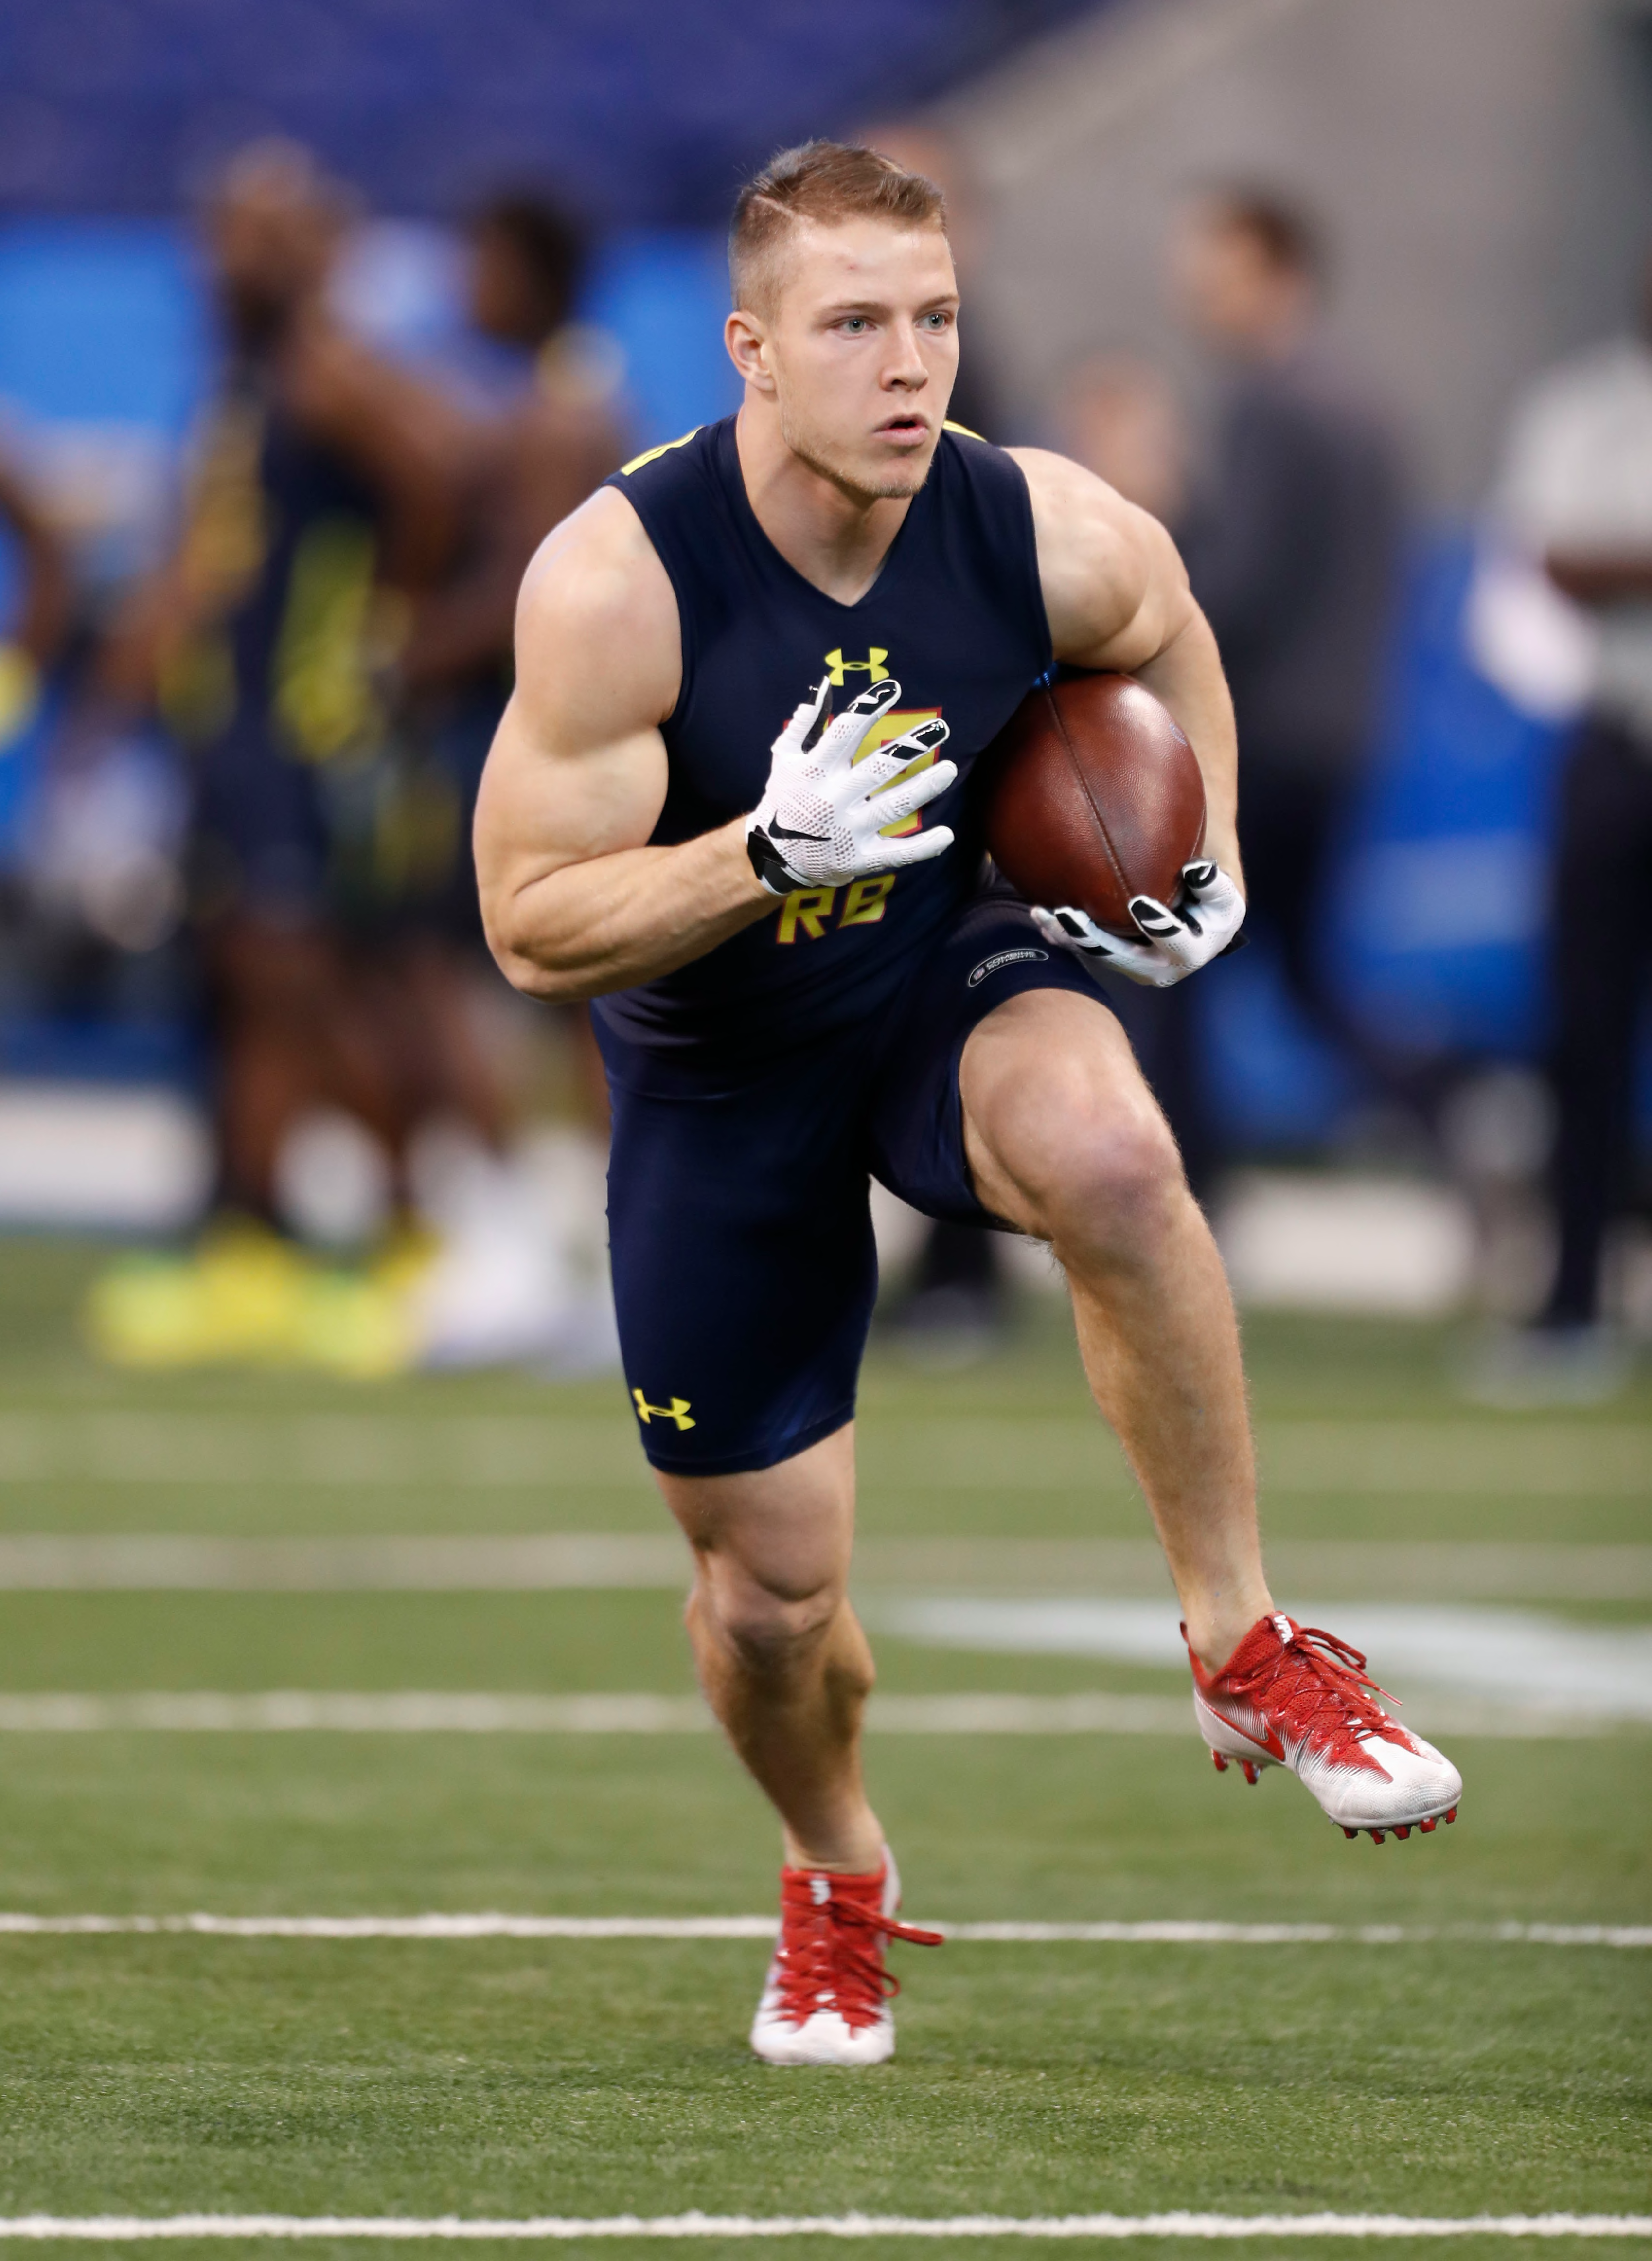 42 HQ Pictures 2017 Nfl Fantasy Rookie Rankings : Fantasy Football Rankings 2017, Top 101 PPR Players: No. 26-24